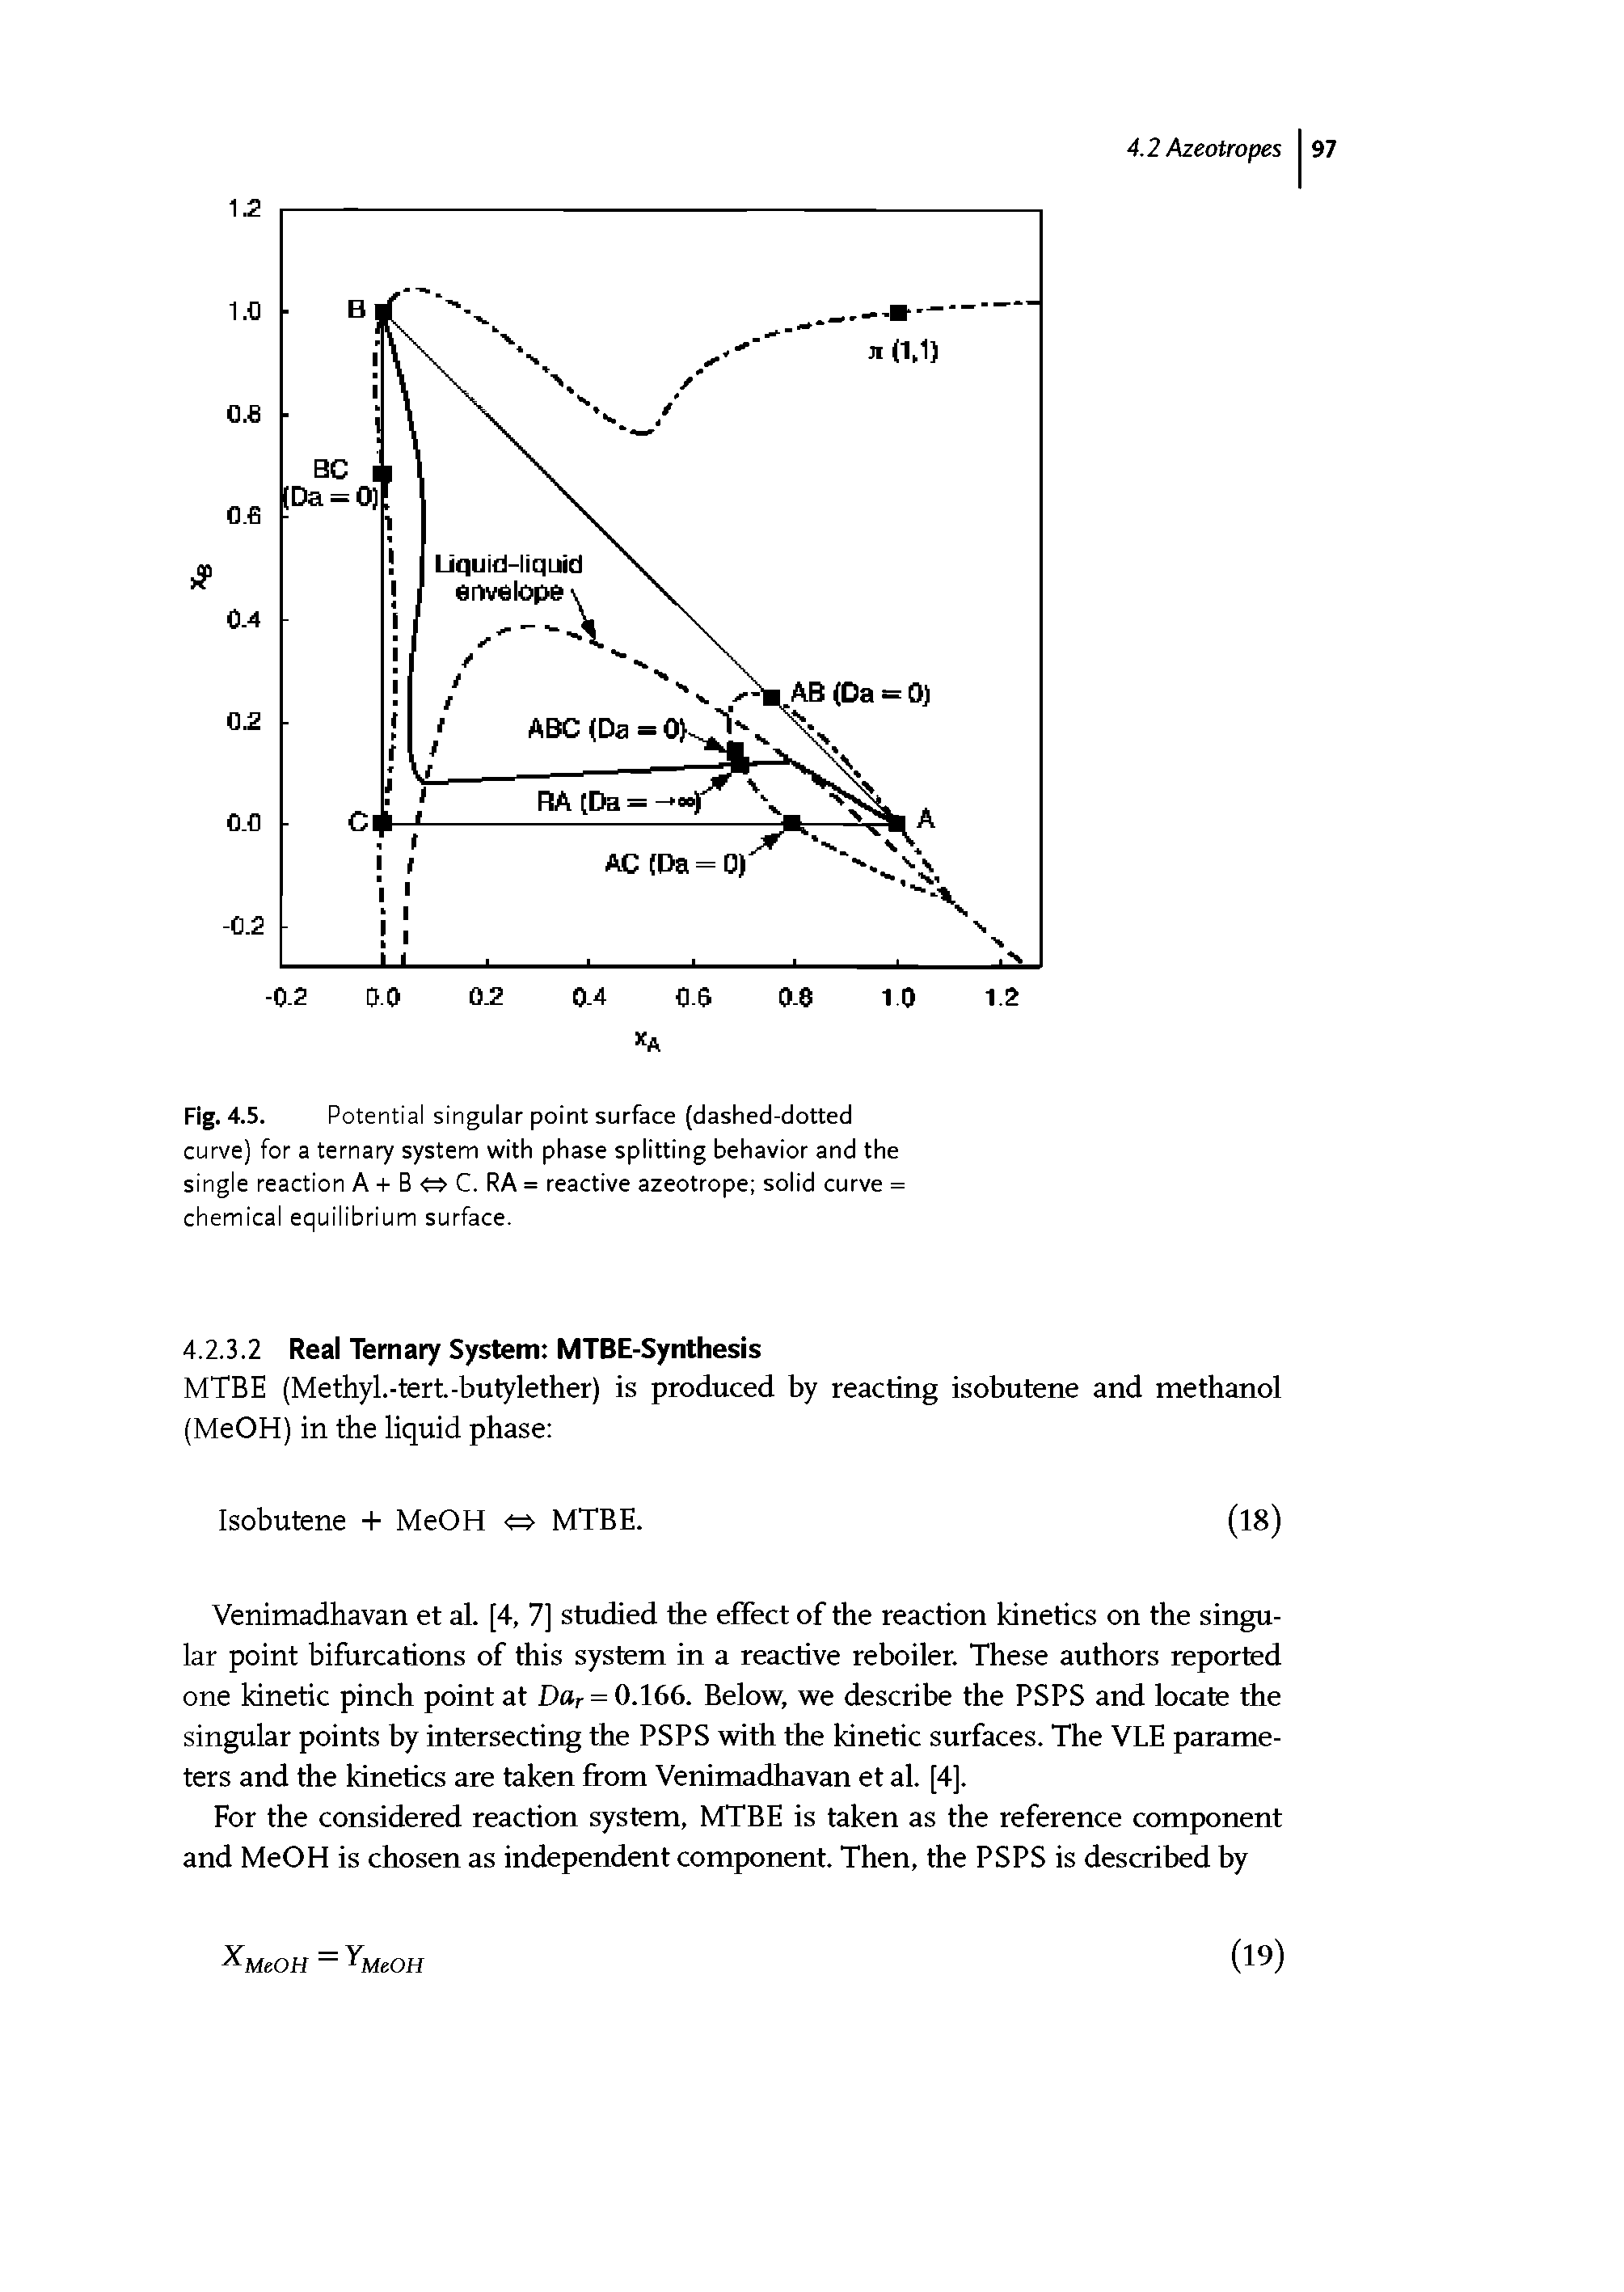 Fig. 4.5. Potential singular point surface (dashed-dotted curve) for a ternary system with phase splitting behavior and the single reaction A + B C. RA = reactive azeotrope solid curve = chemical equilibrium surface.